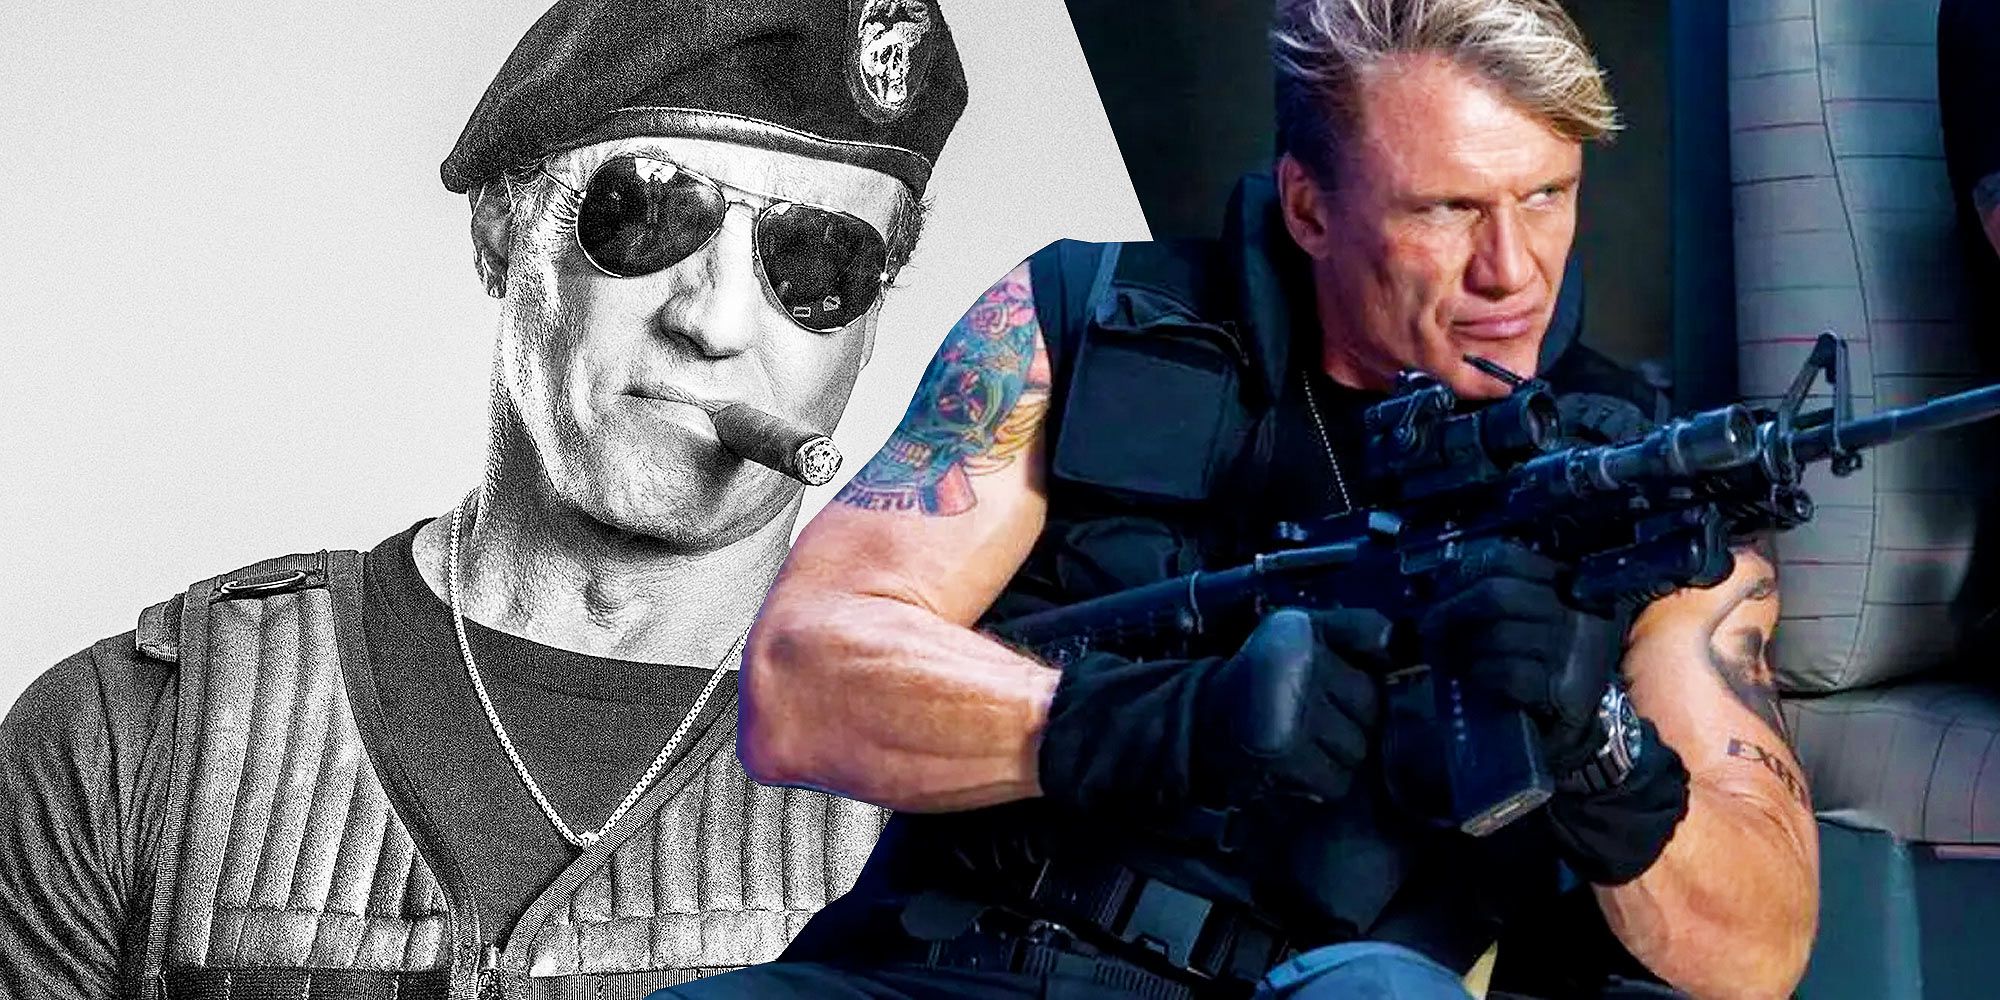 Lundgren Details Extended Prank Stallone Pulled on Expendables Set